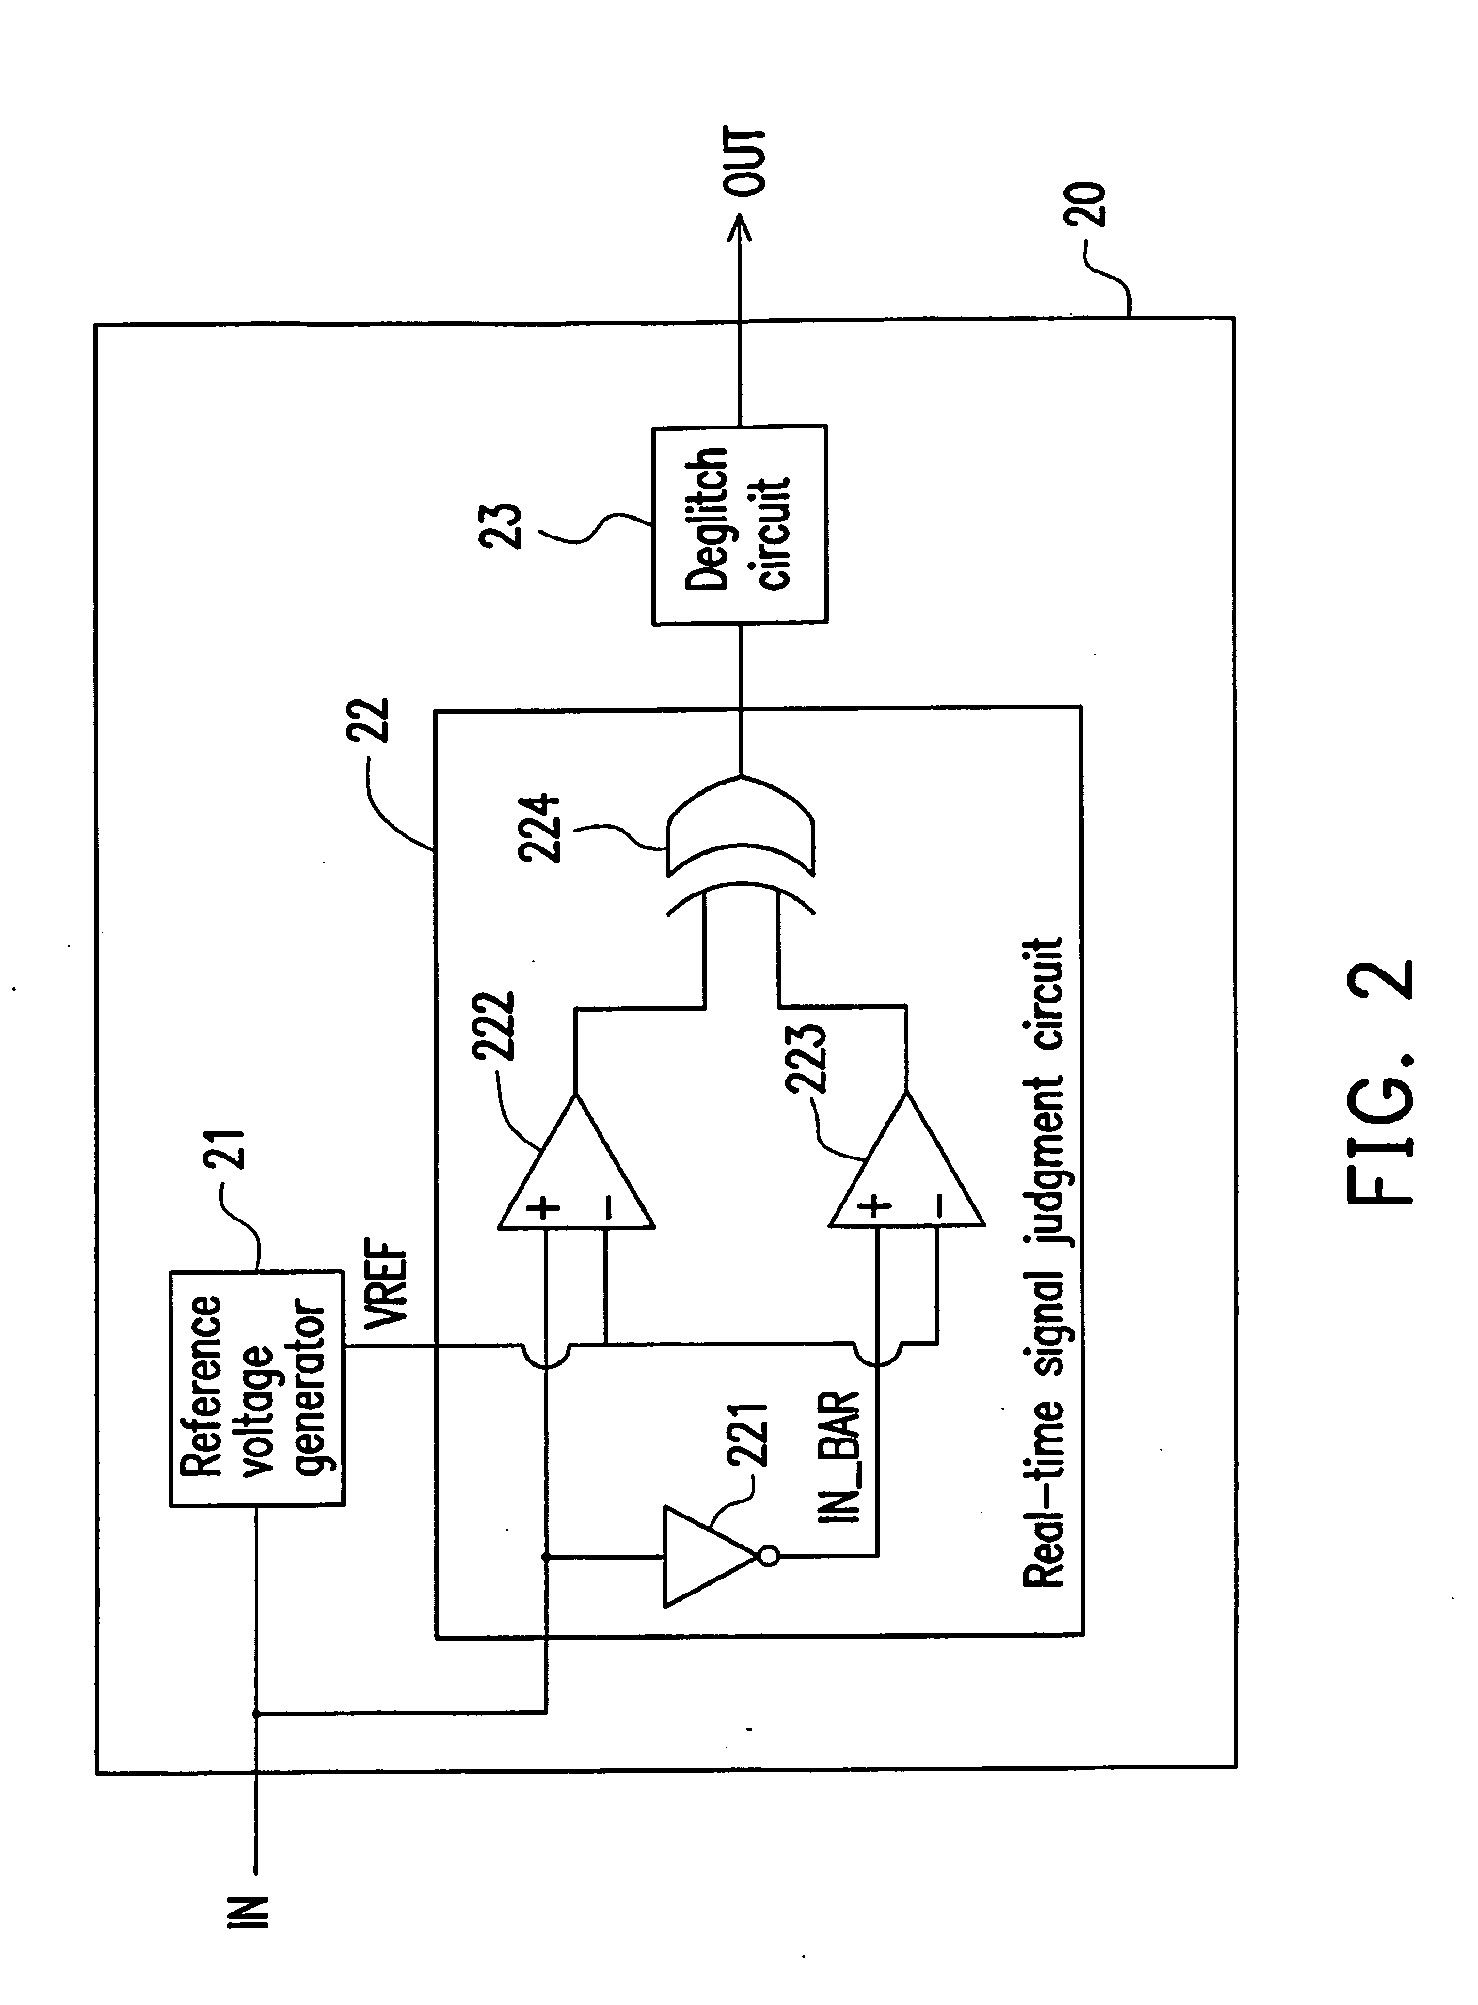 Signal detection circuit with deglitch and method thereof